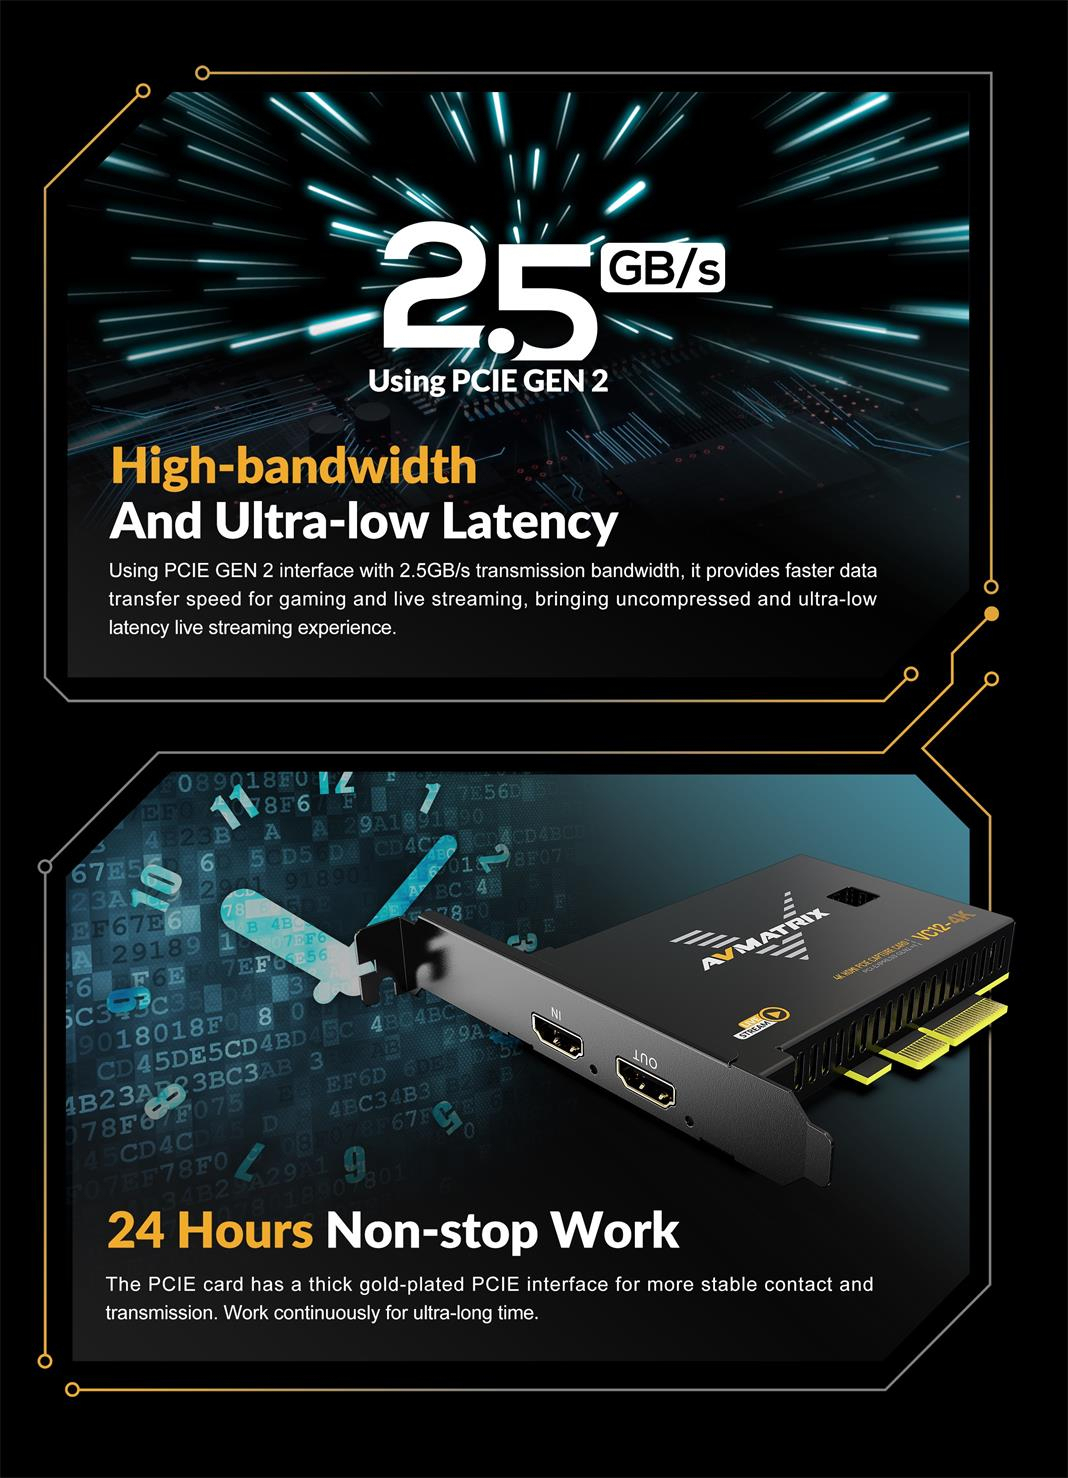 High-bandwidth and Ultra-low Latency